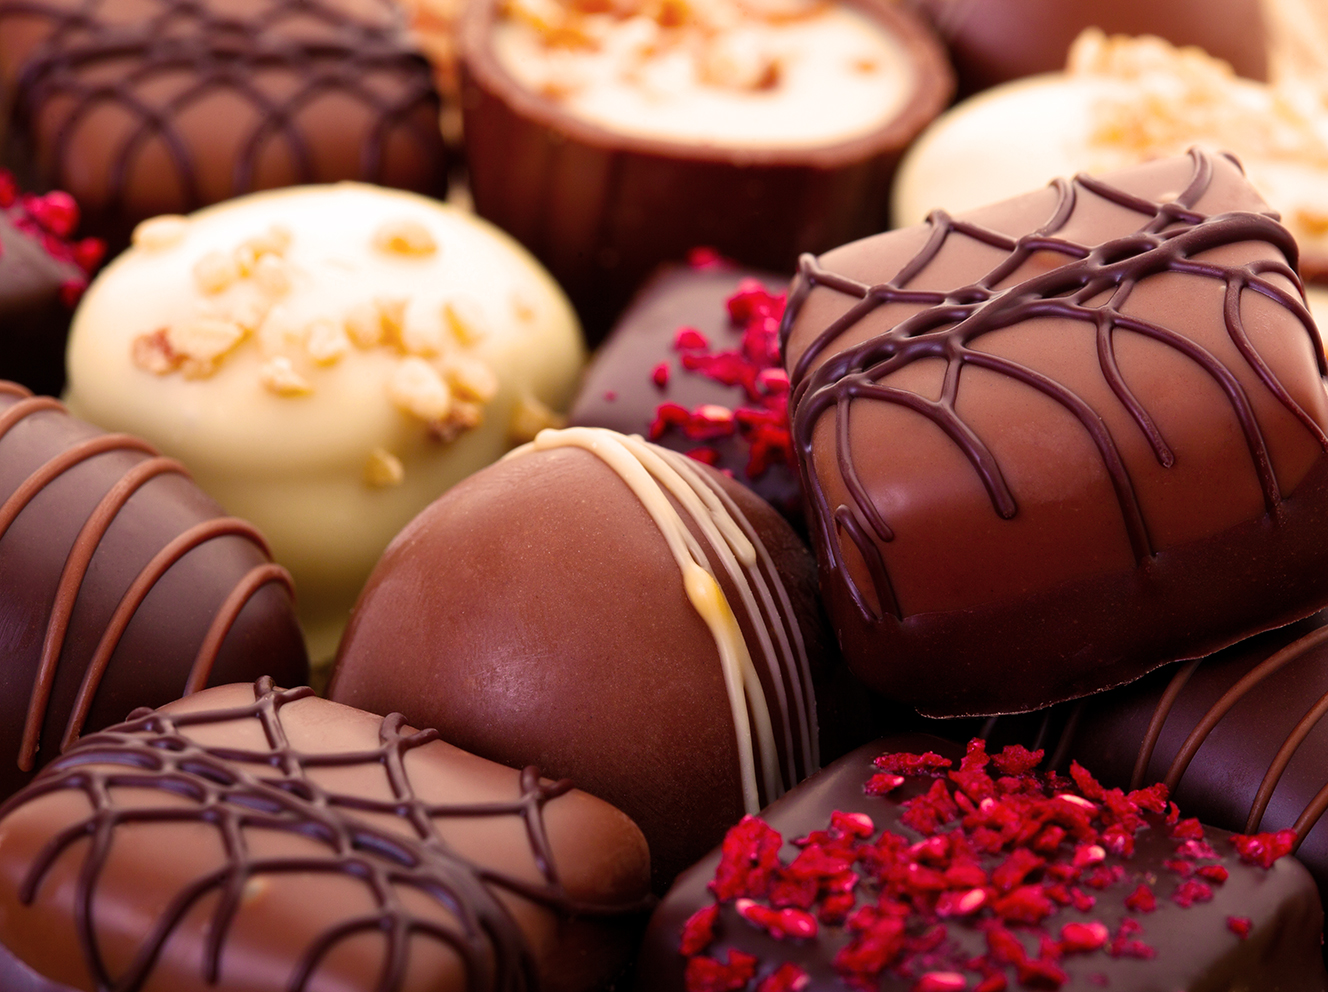 Does Chocolate Win Your Heart Over?